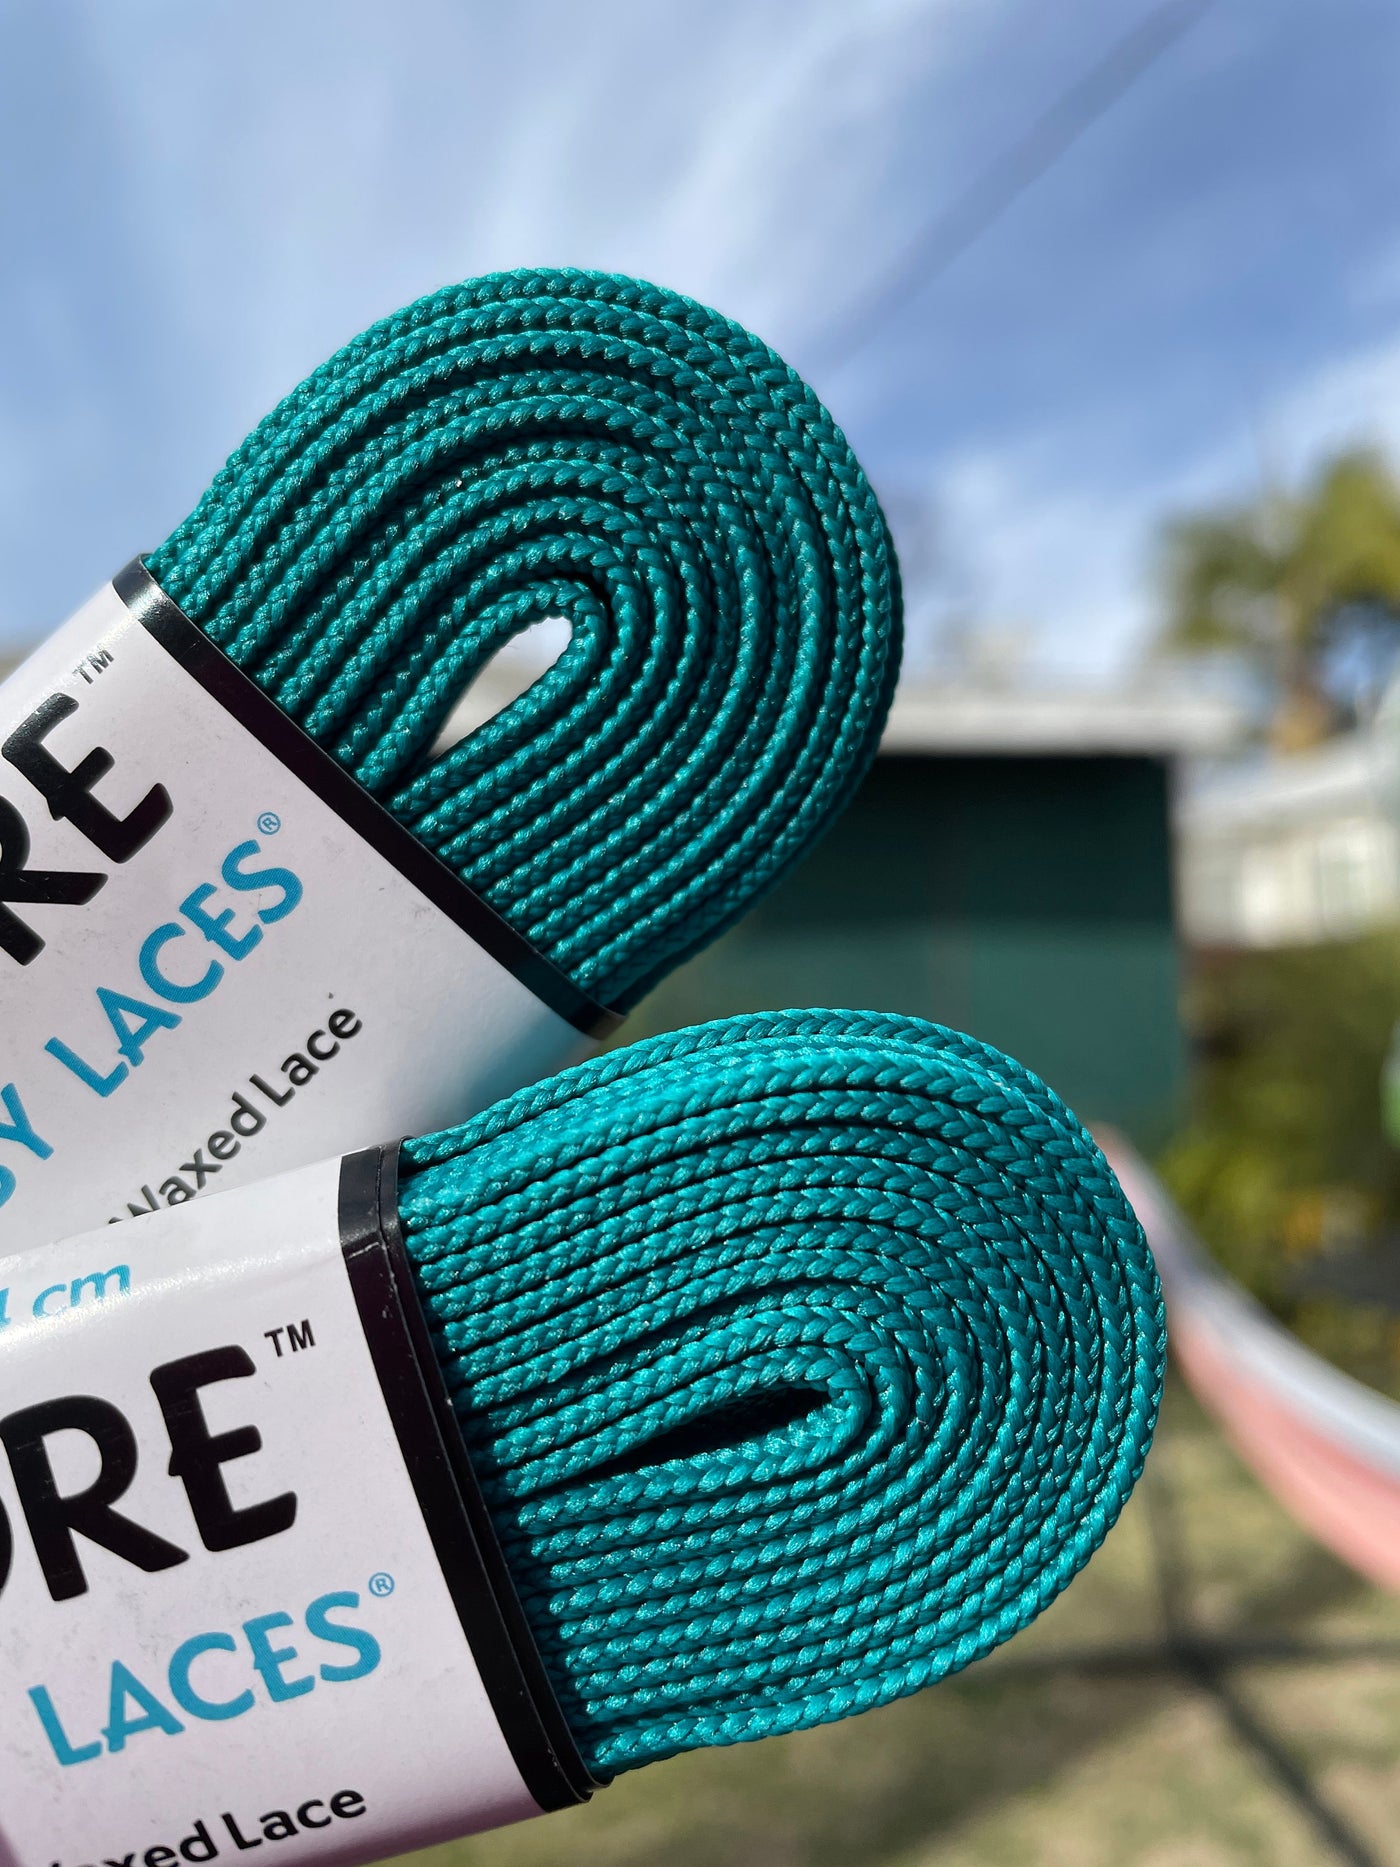 Teal 96 inch Roller Skate CORE Laces! Narrow 6mm, Pair